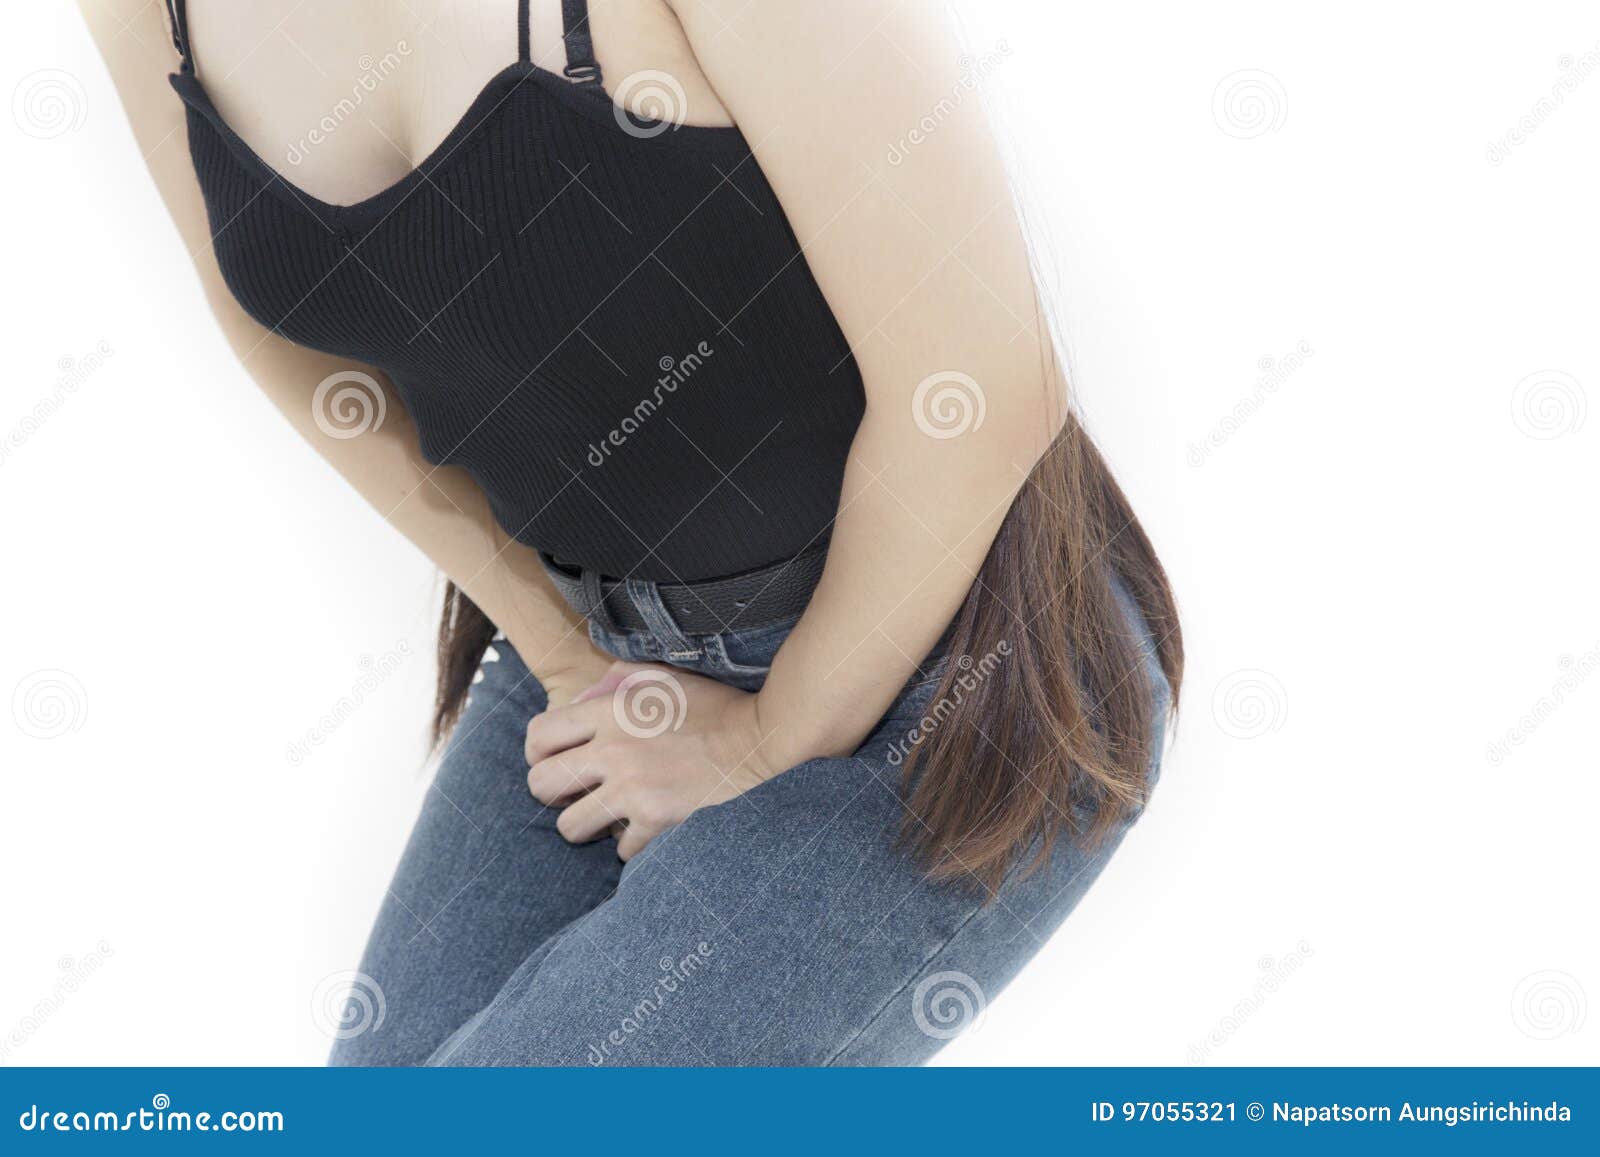 woman covering her crotch with a sad character drawn on paper Stock Photo